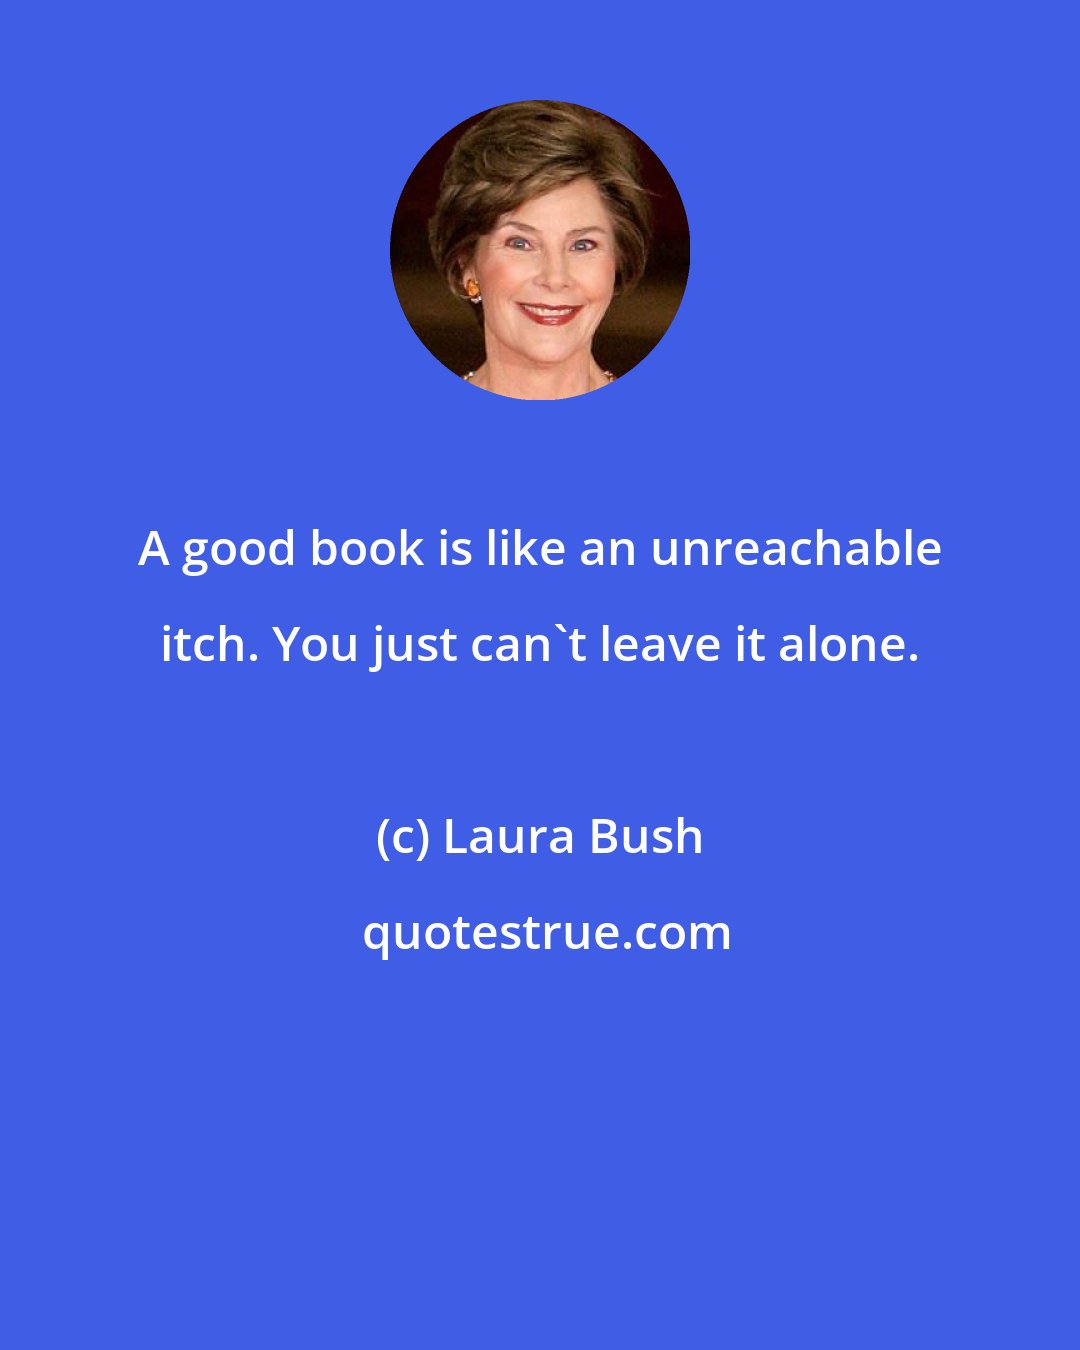 Laura Bush: A good book is like an unreachable itch. You just can't leave it alone.